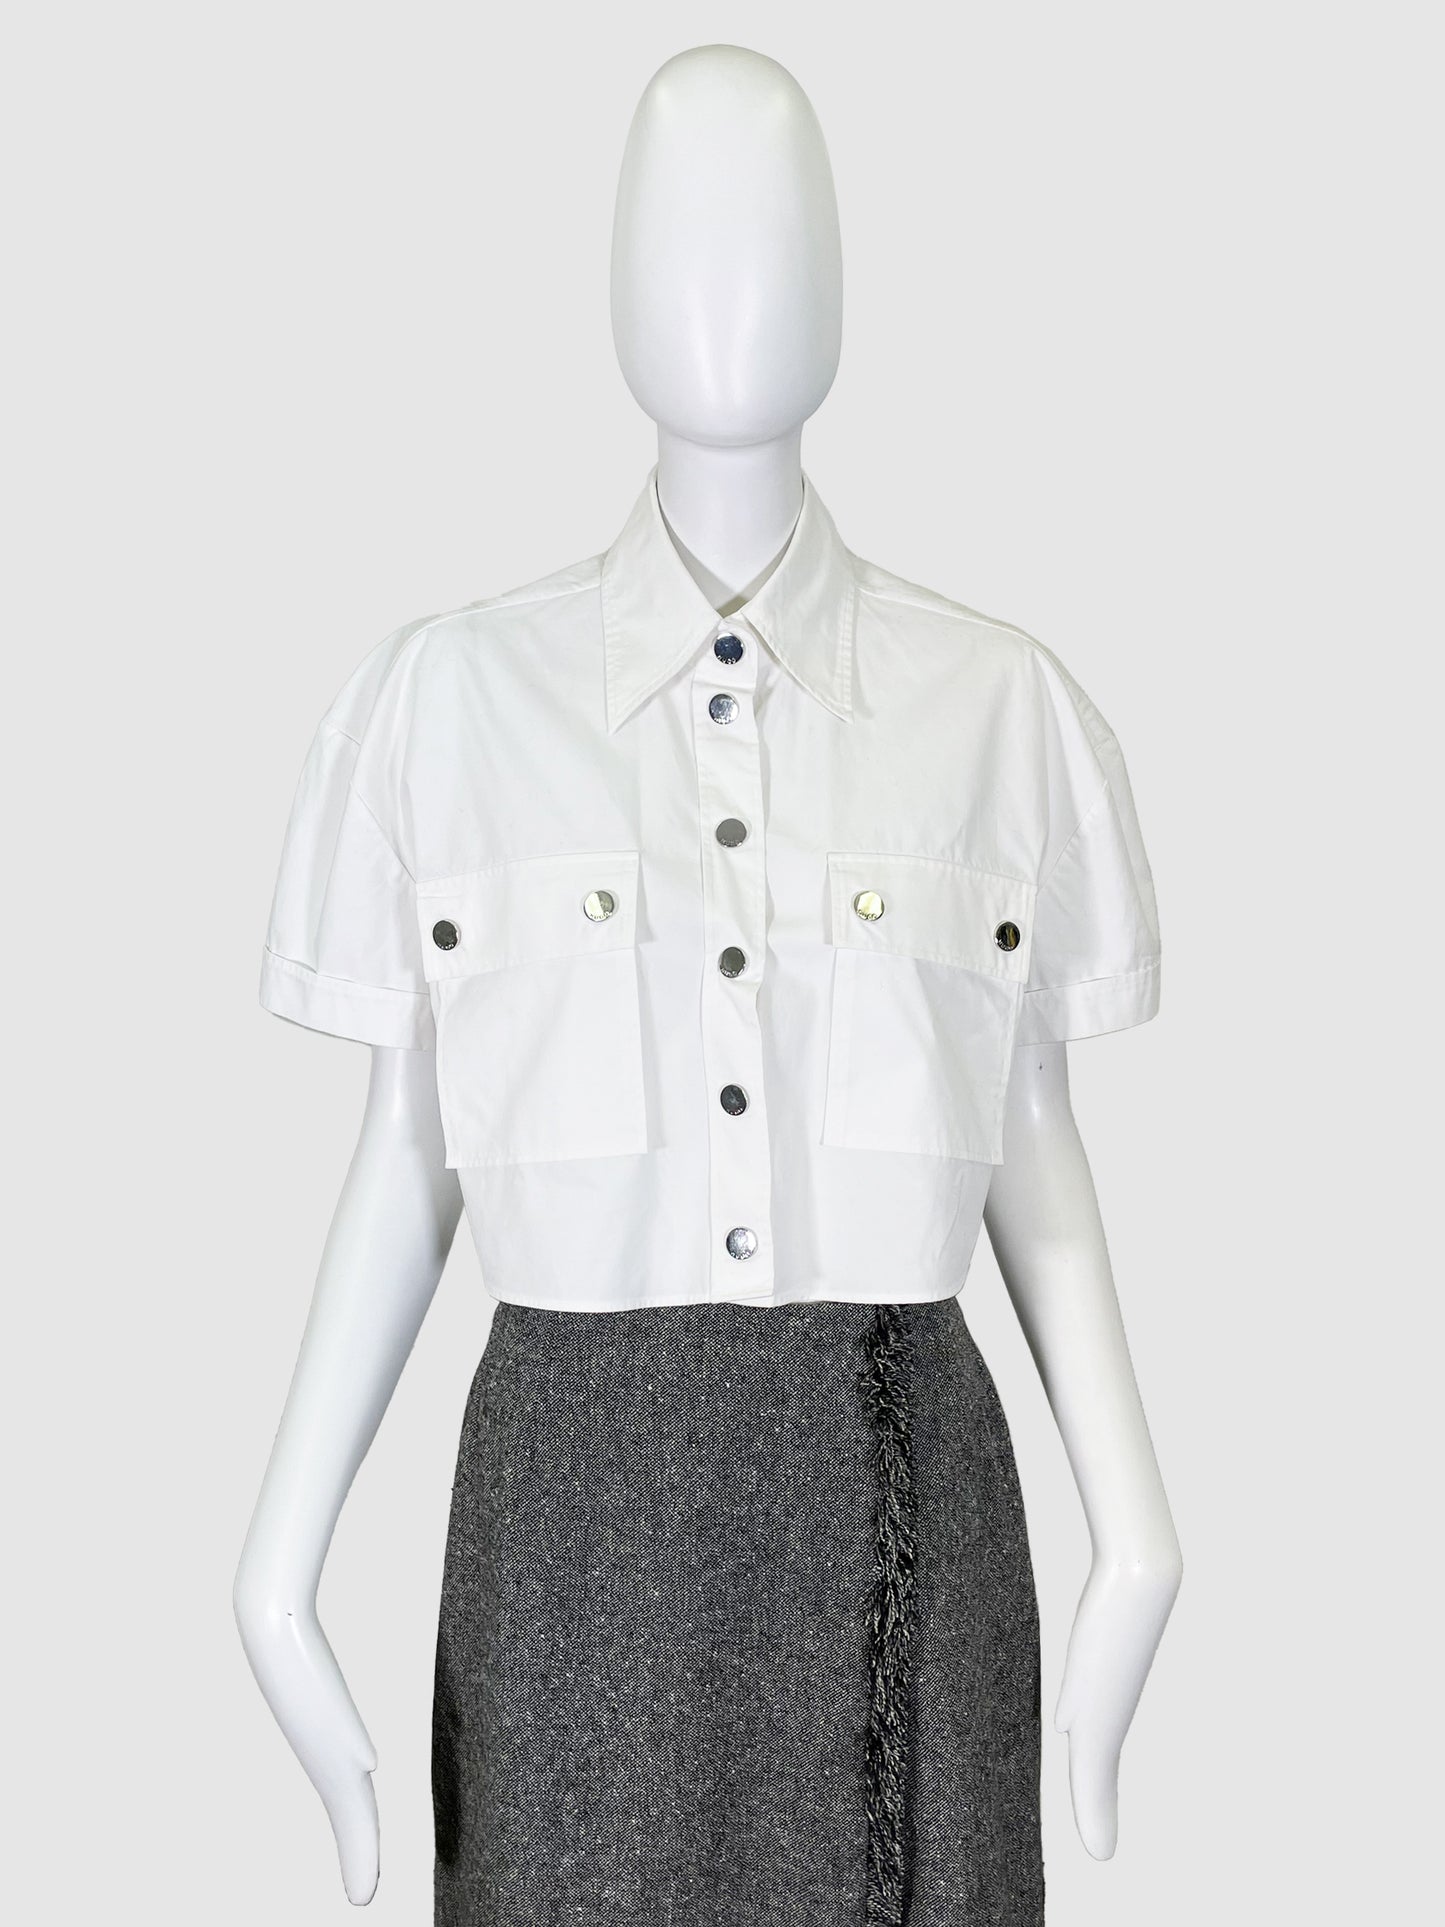 Hugo Boss White Crop Button-Up Blouse - Size 36